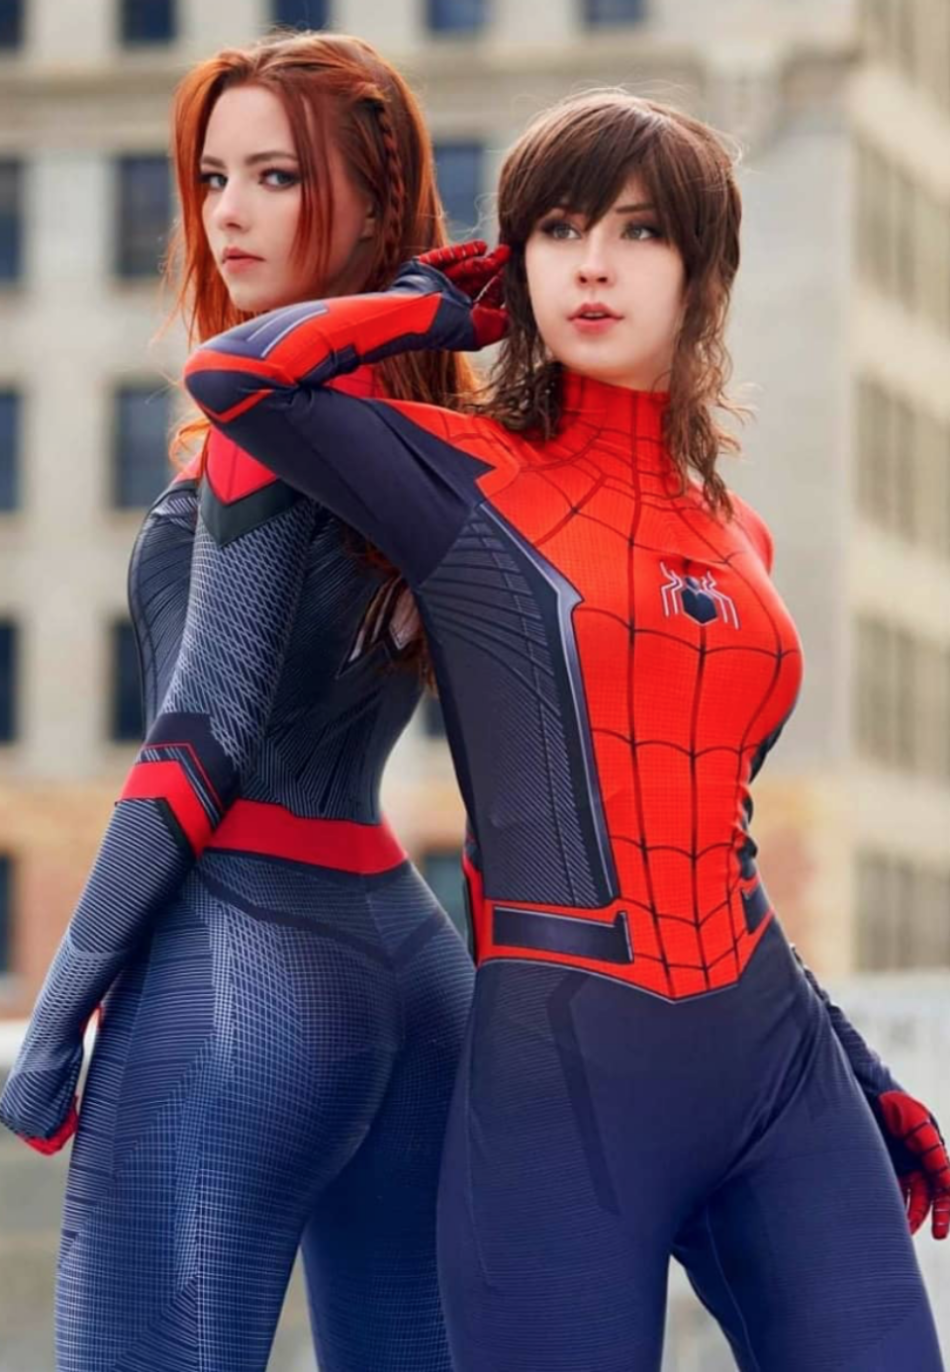 Sexy Red Hot Cosplay Girls Spiderman Women Best Photo Compilation 2021 (89 HQ Photos) 201